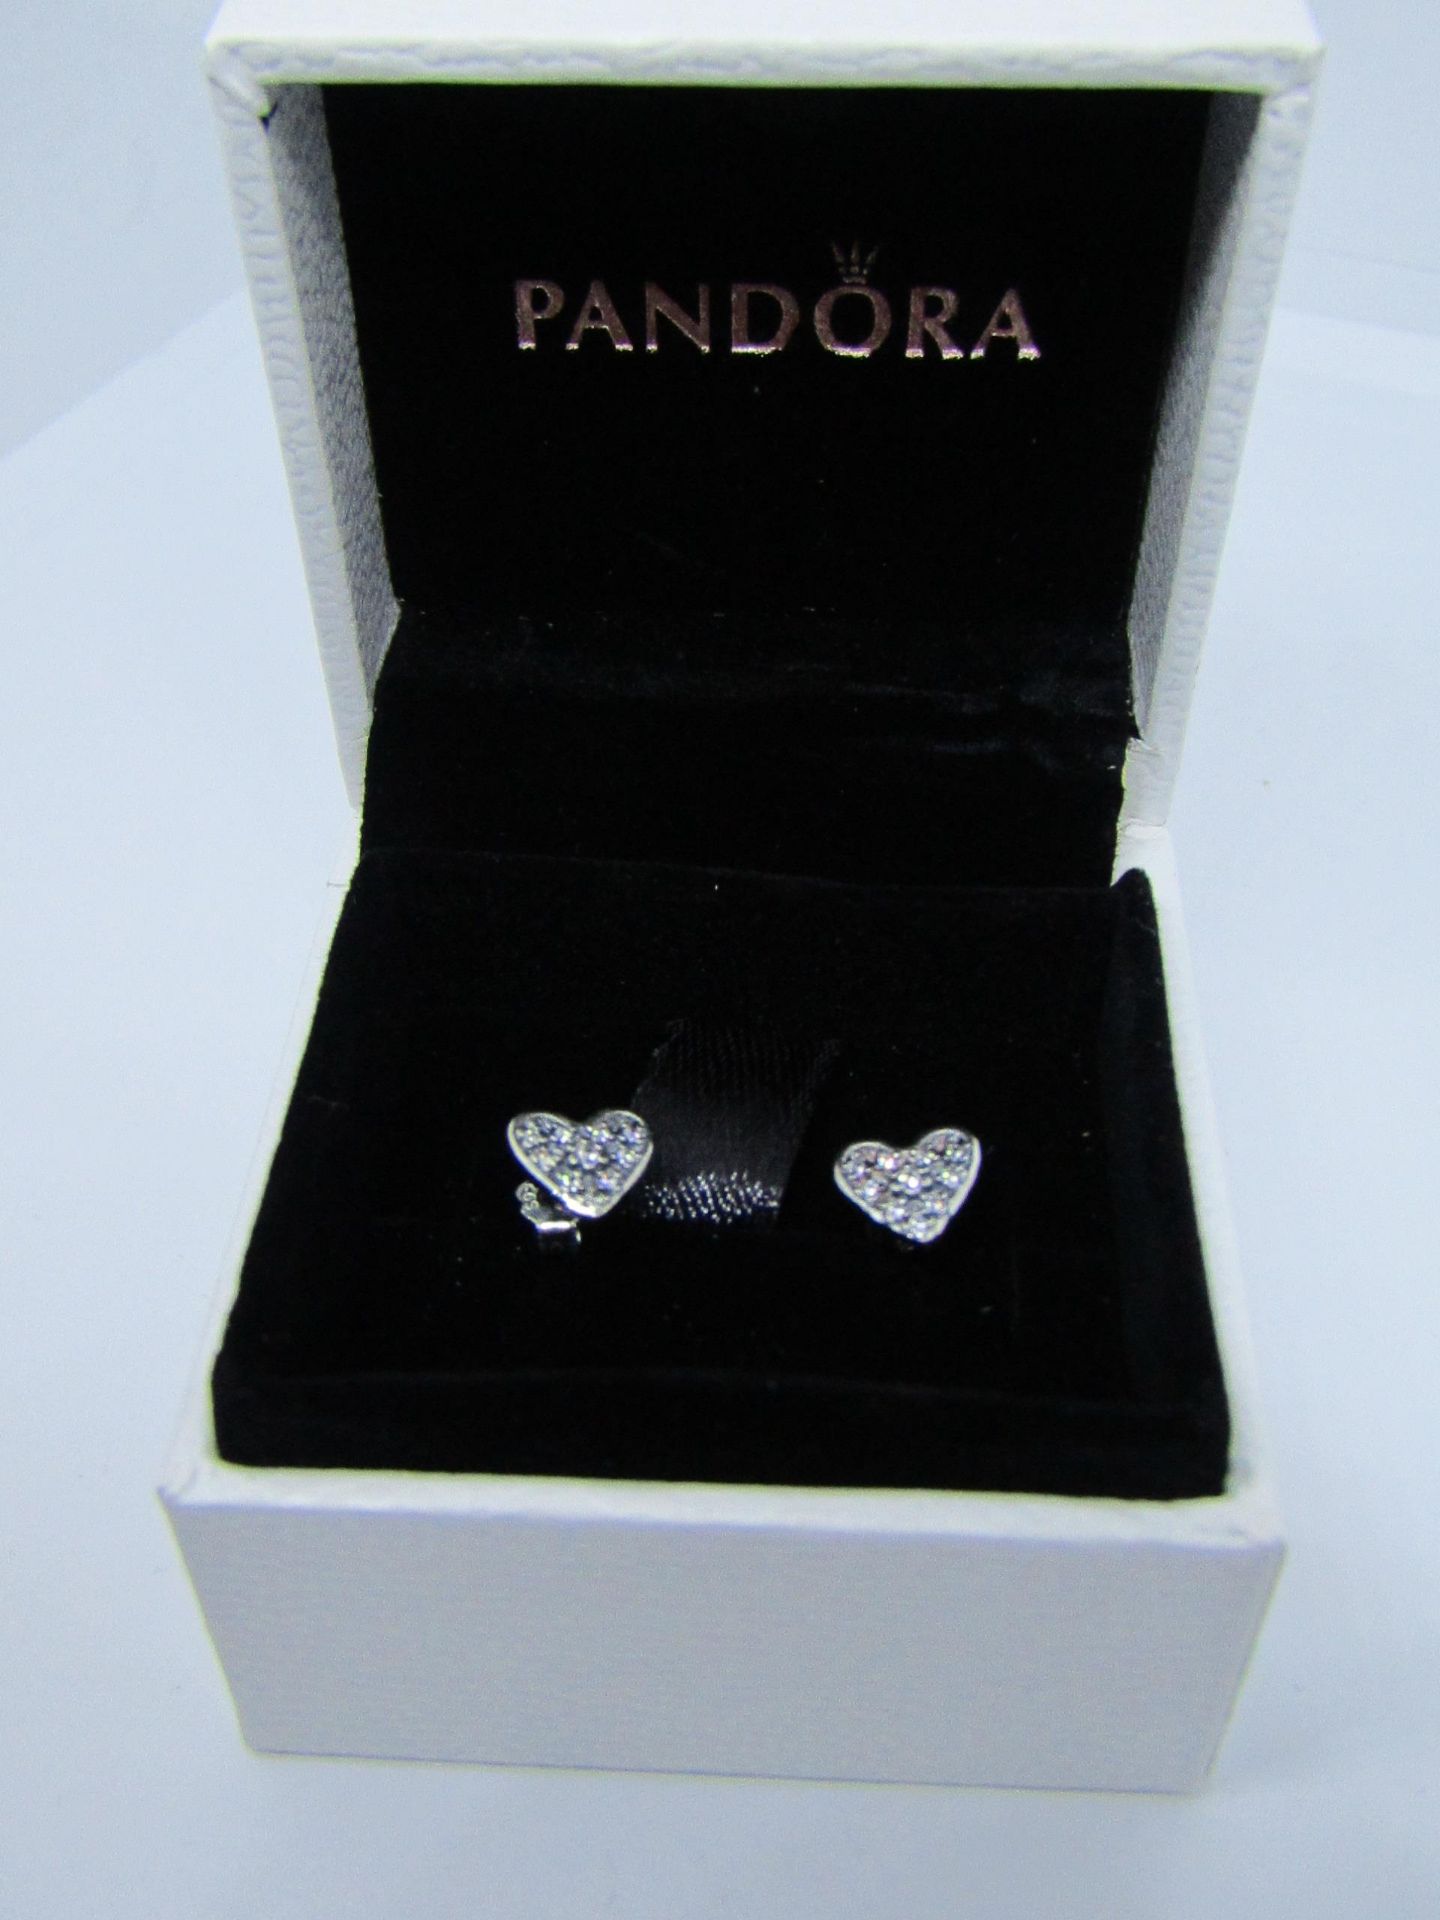 Pandora Silver 925 Earrings (see image for design) in Presentation box & Gift bag (ideal gift for